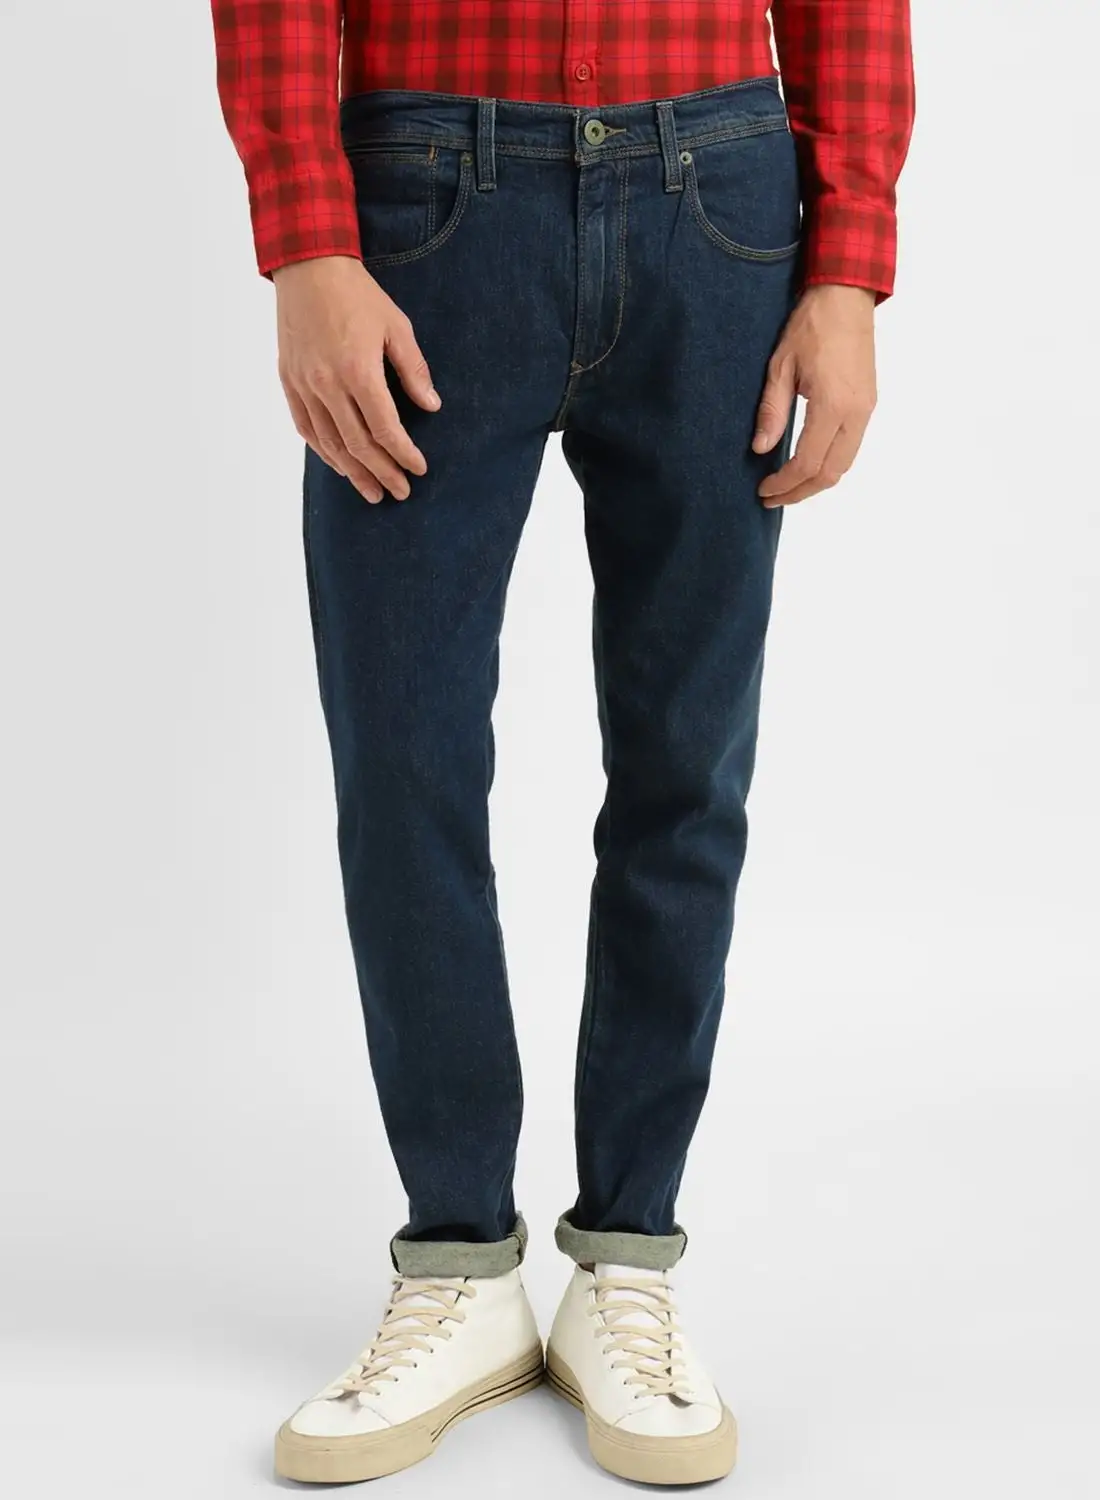 Levi's Rinse Wash Straight Fit Jeans